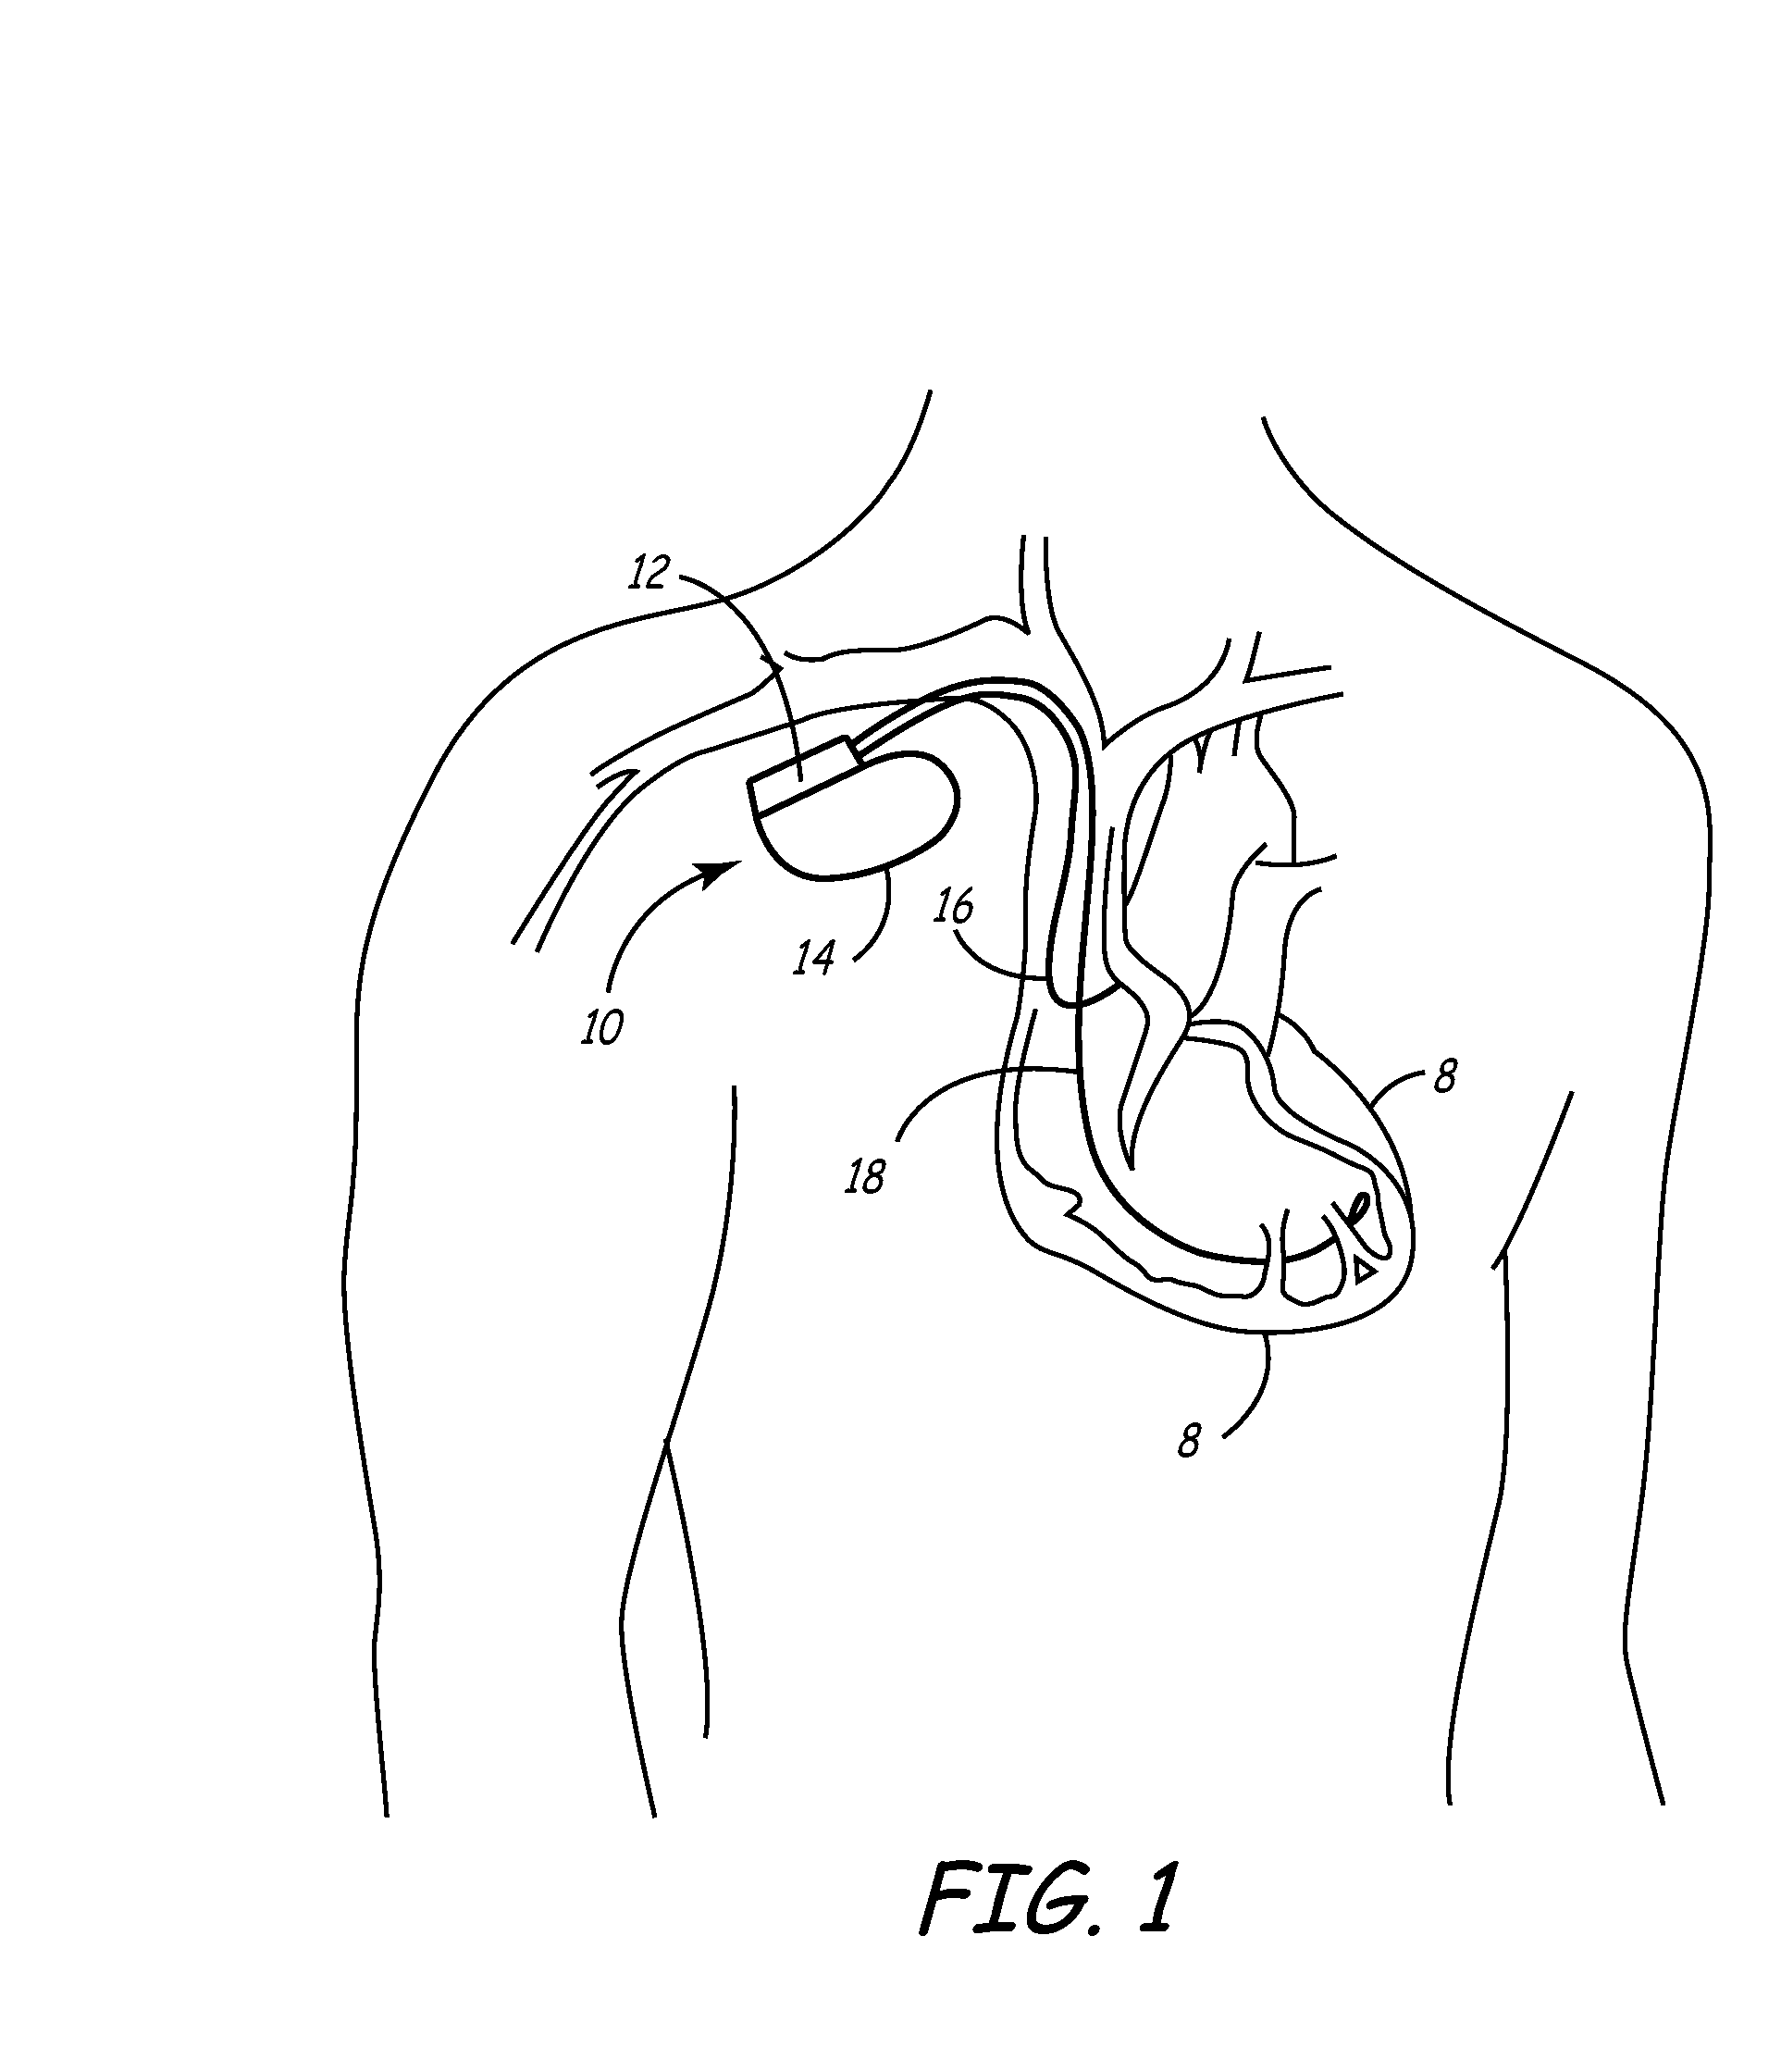 Synchronized atrial anti-tachy pacing system and method